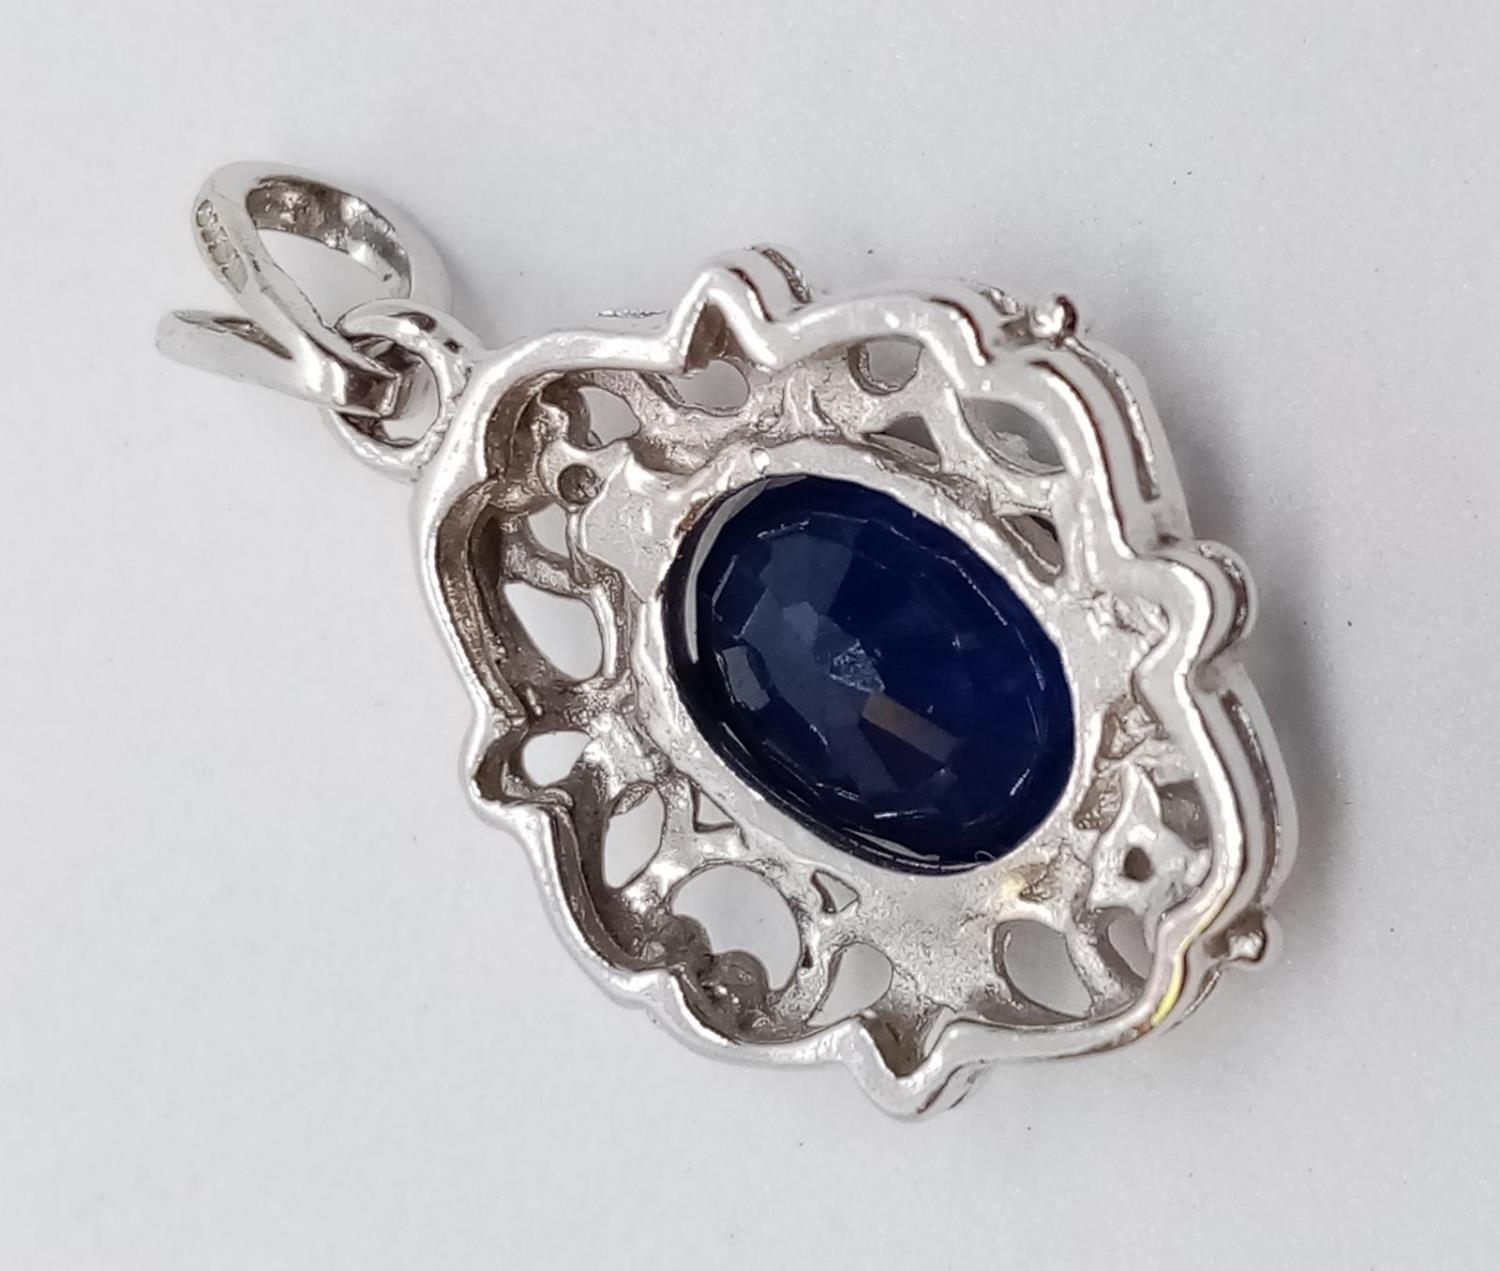 9ct White Gold Diamond and Sapphire PENDANT. 2.3g - Image 3 of 4